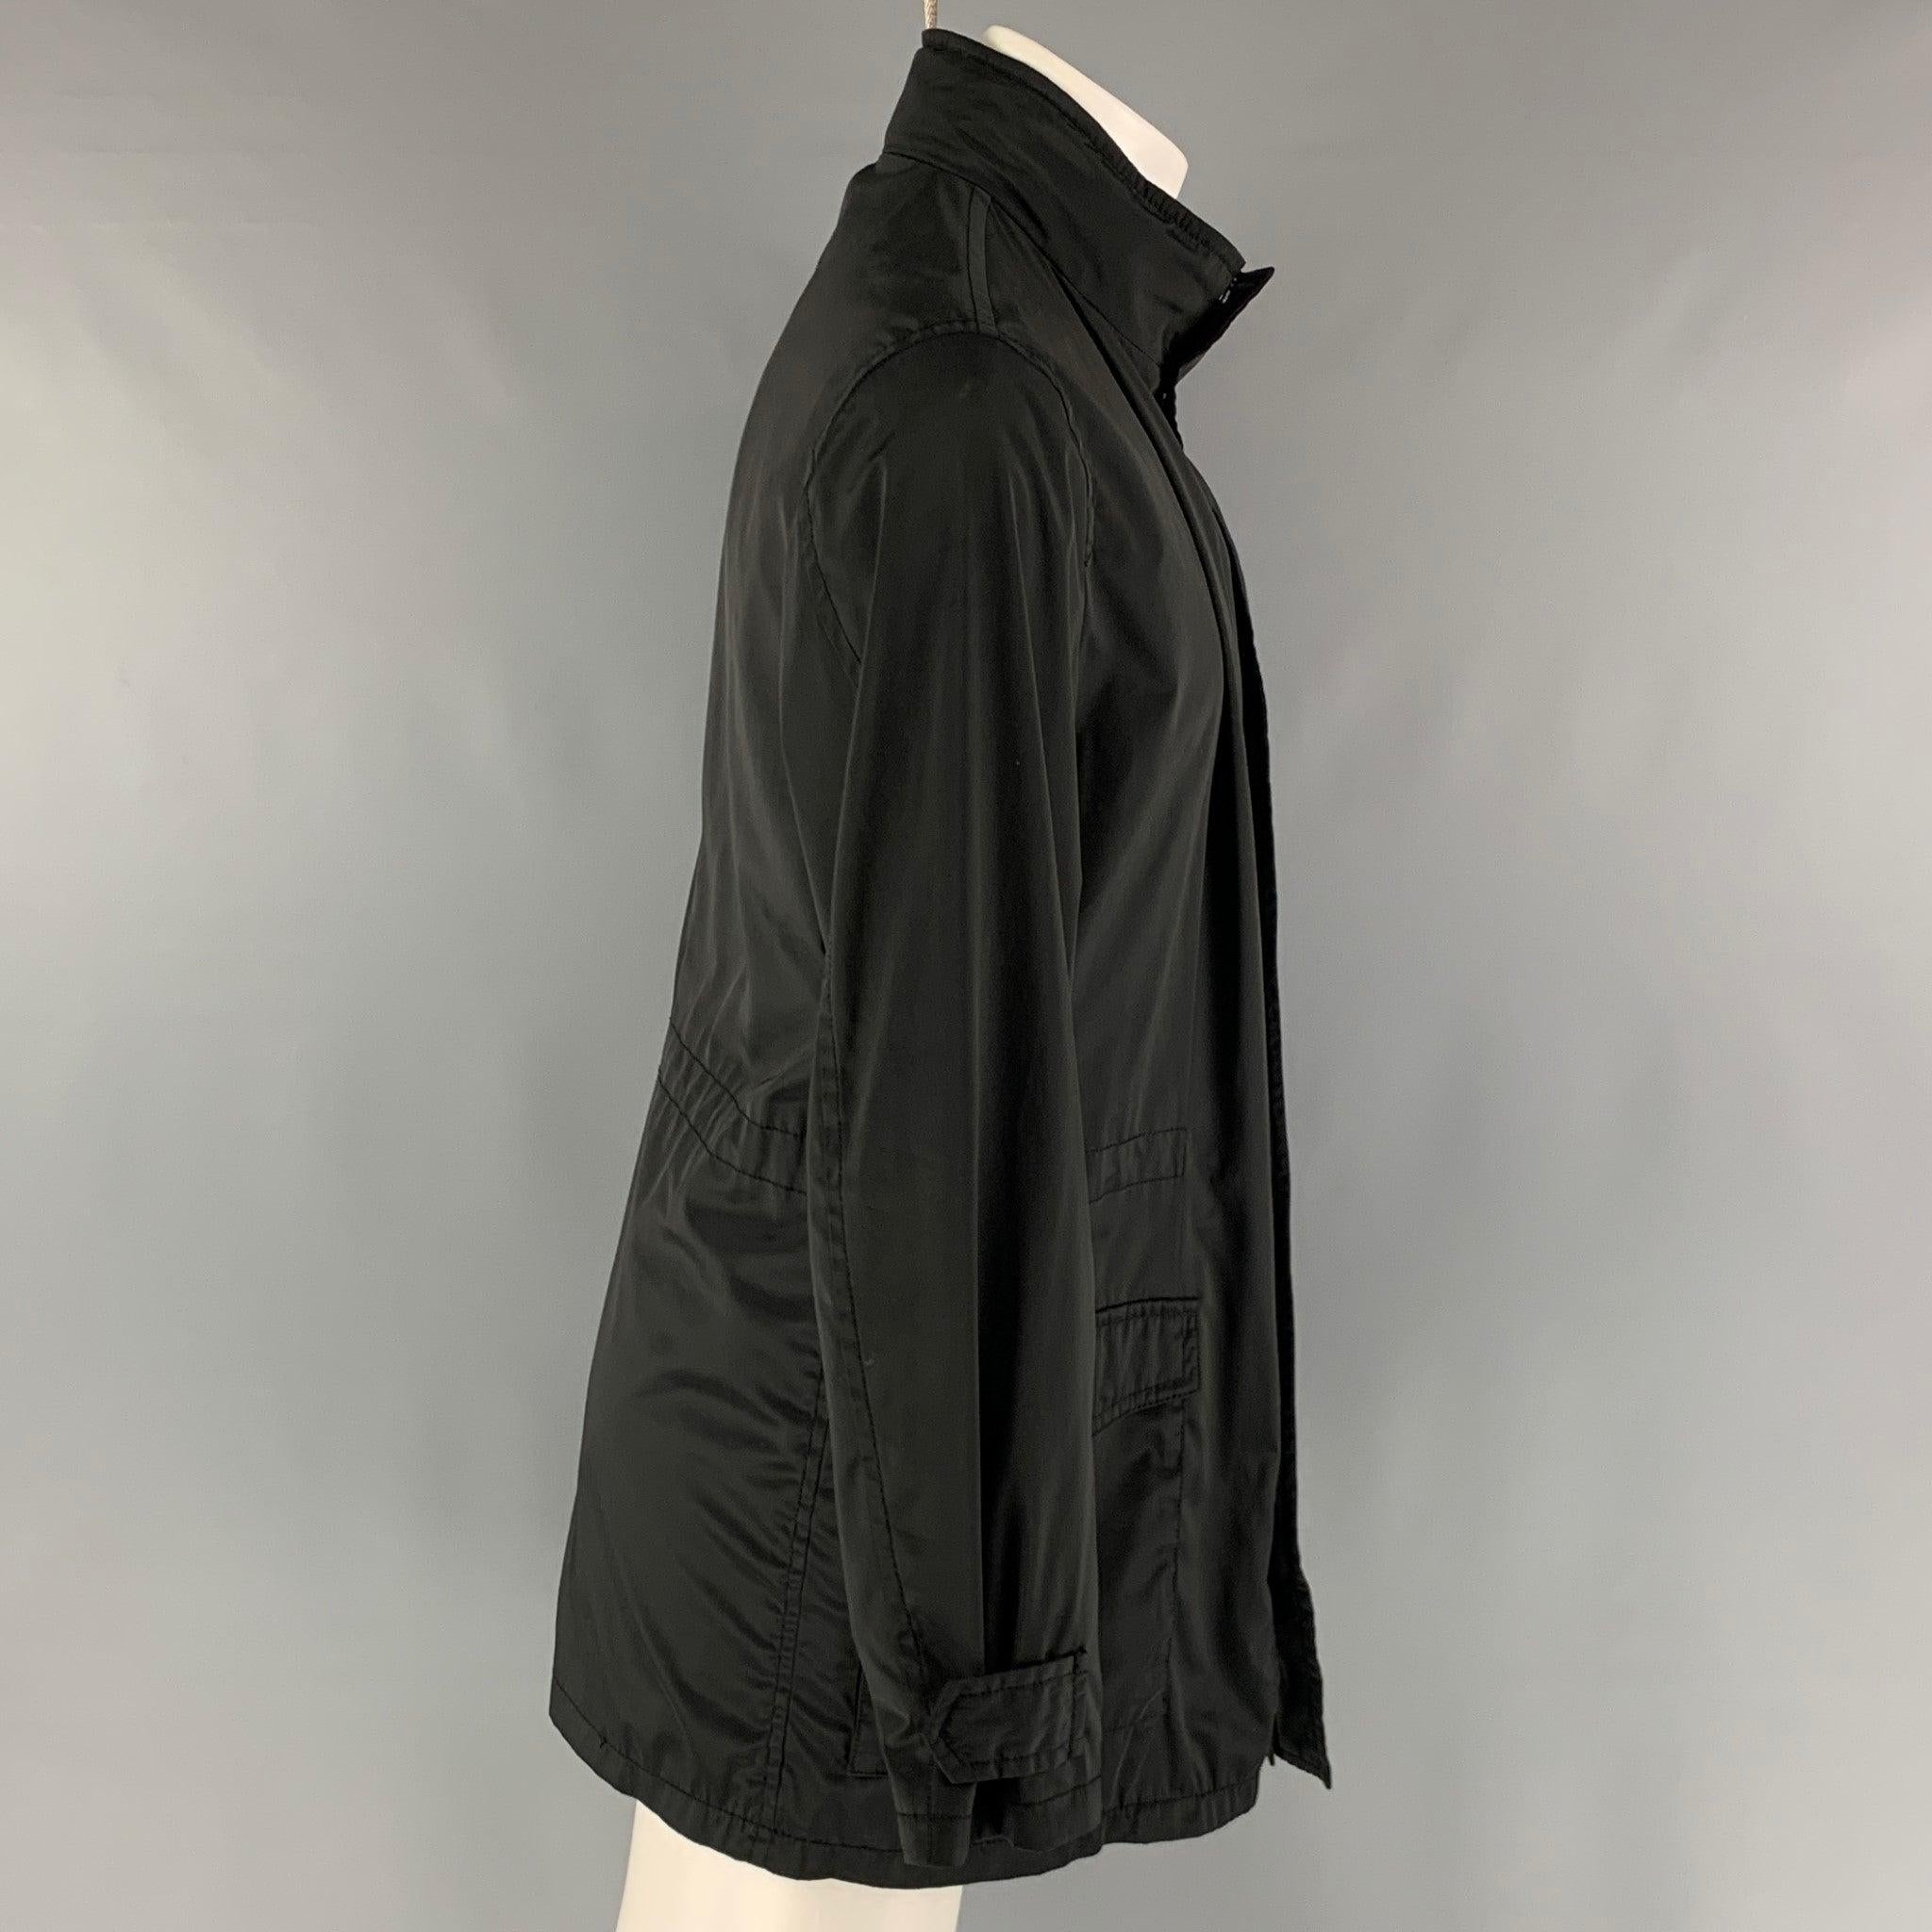 ARMANI COLLEZIONI windbreaker jacket comes in a black polyester water repellent woven material featuring a park style, patch pockets, internal hood, and a zip up and snap button closure. Excellent Pre-Owned Condition. 

Marked:   40 

Measurements: